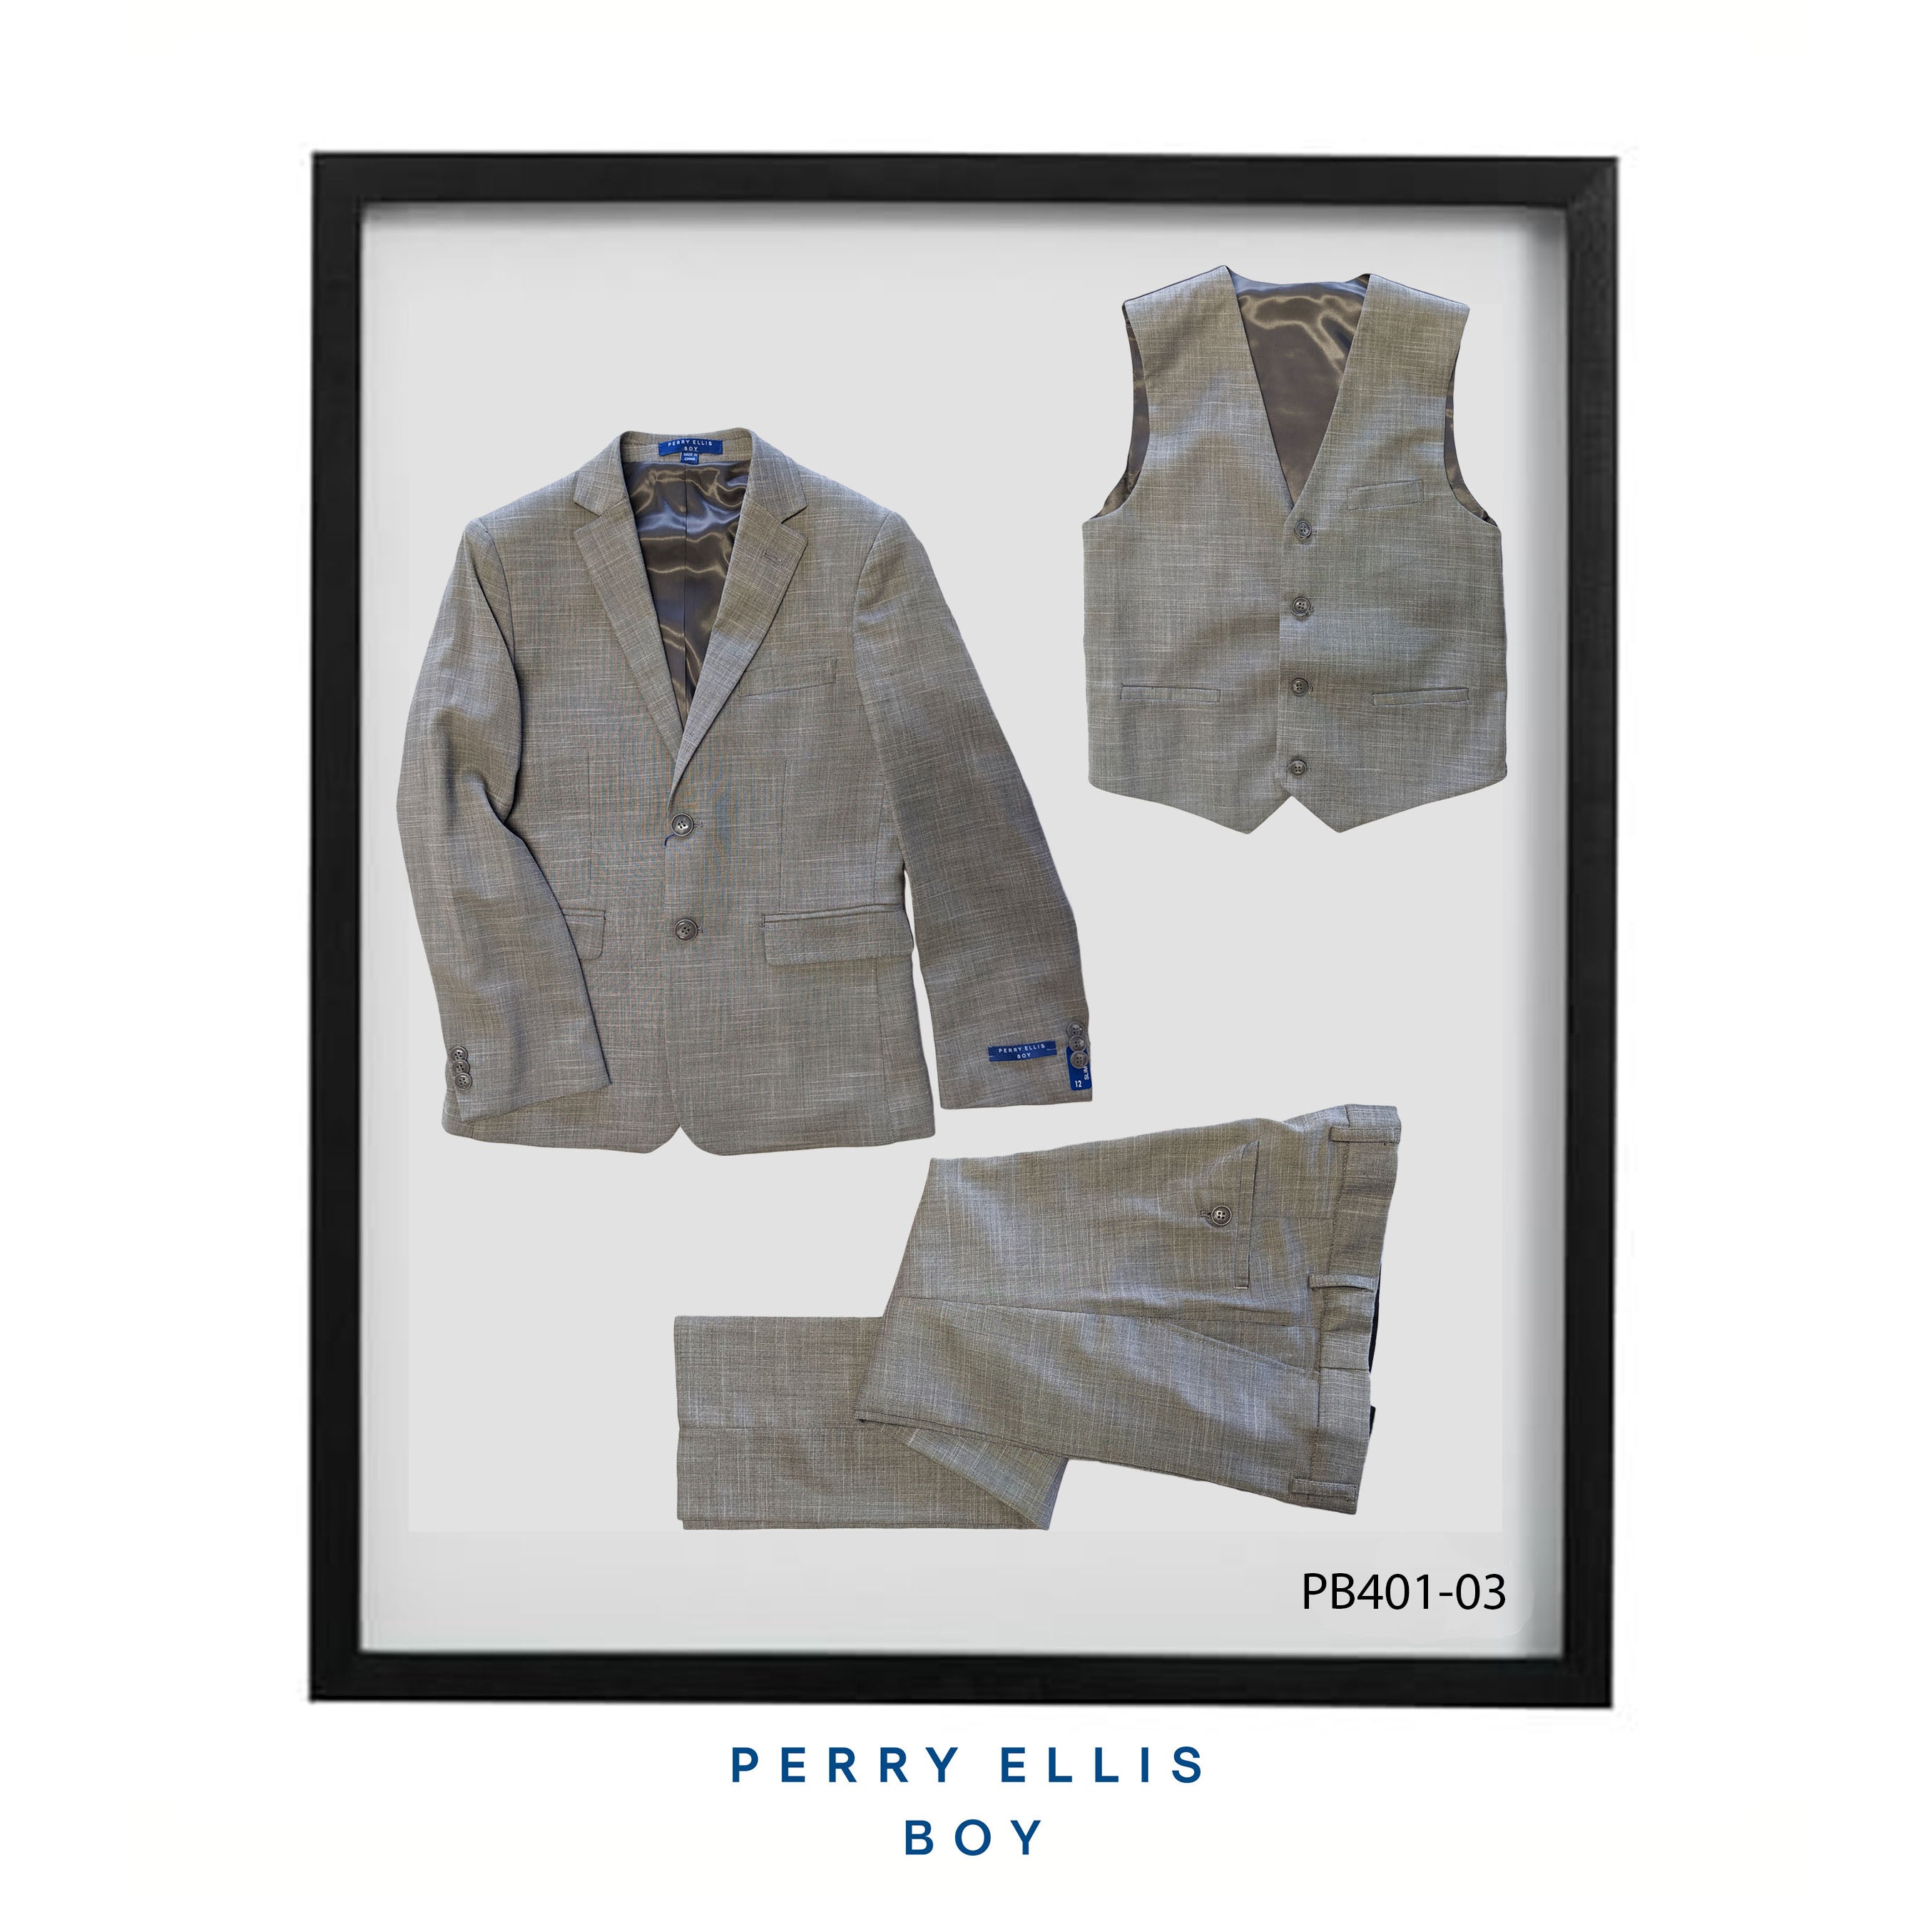 Lt Grey 3 Piece Perry Ellis Textured Suits For Boys PB401-03